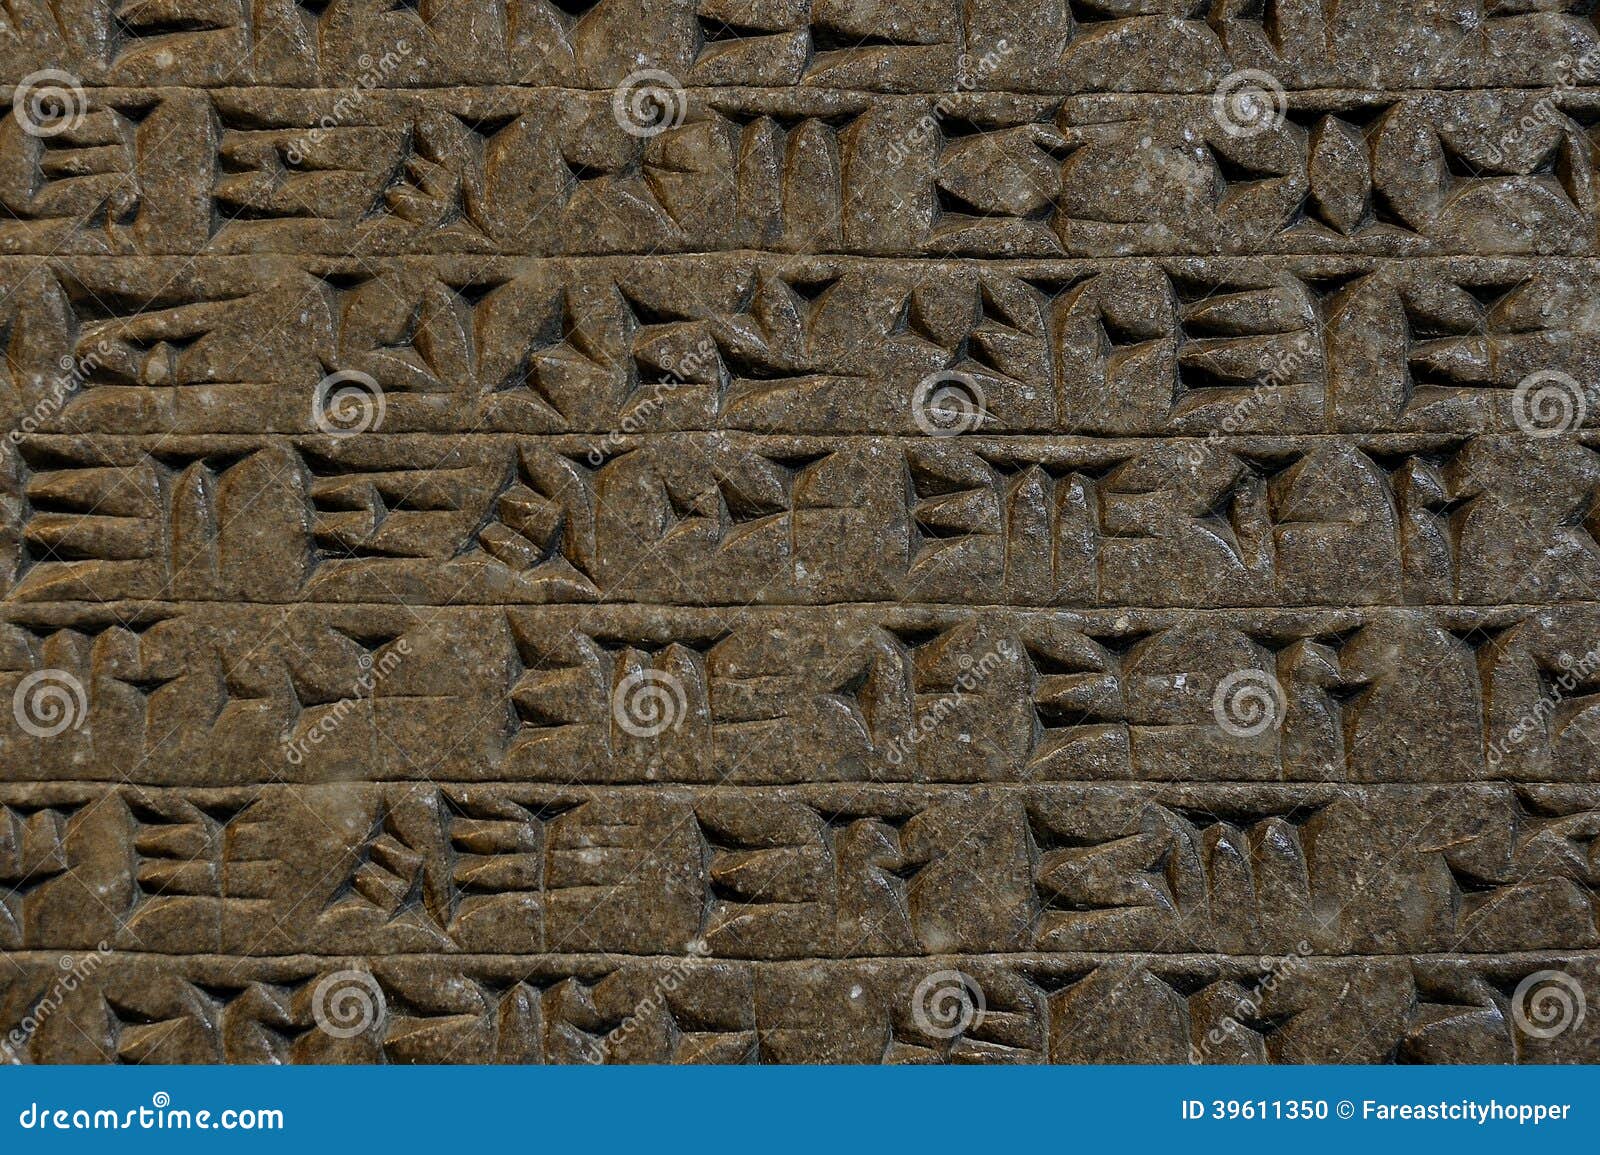 cuneiform clay tablet writing from mesopotamia